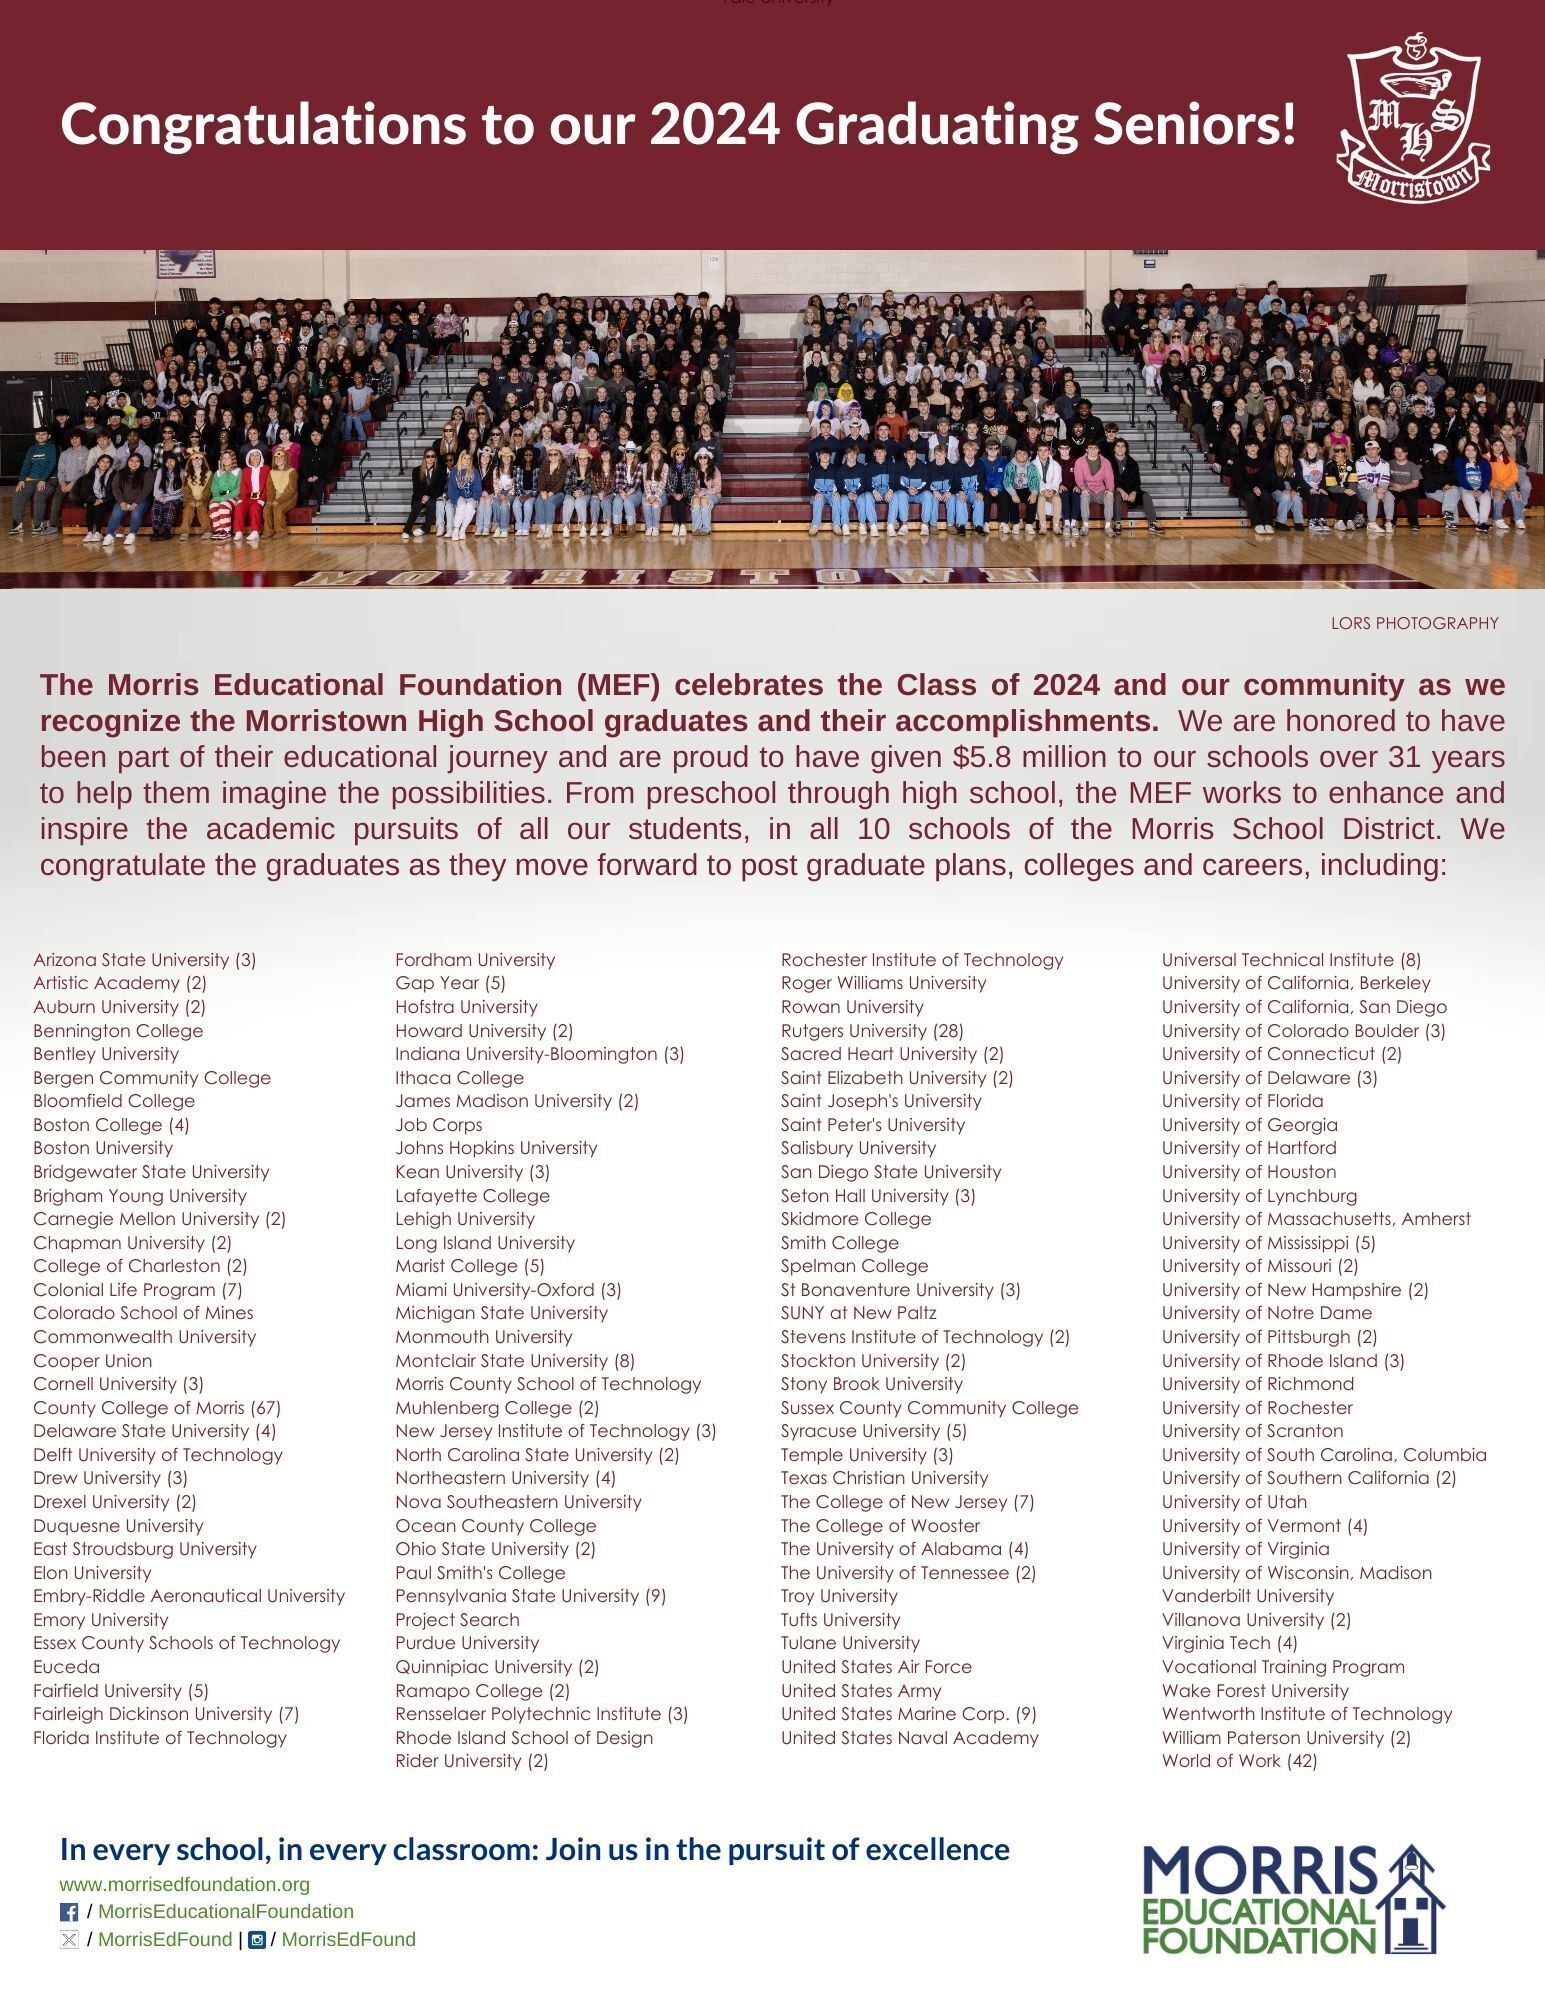 Congrats to the Morristown High School Class of 2024